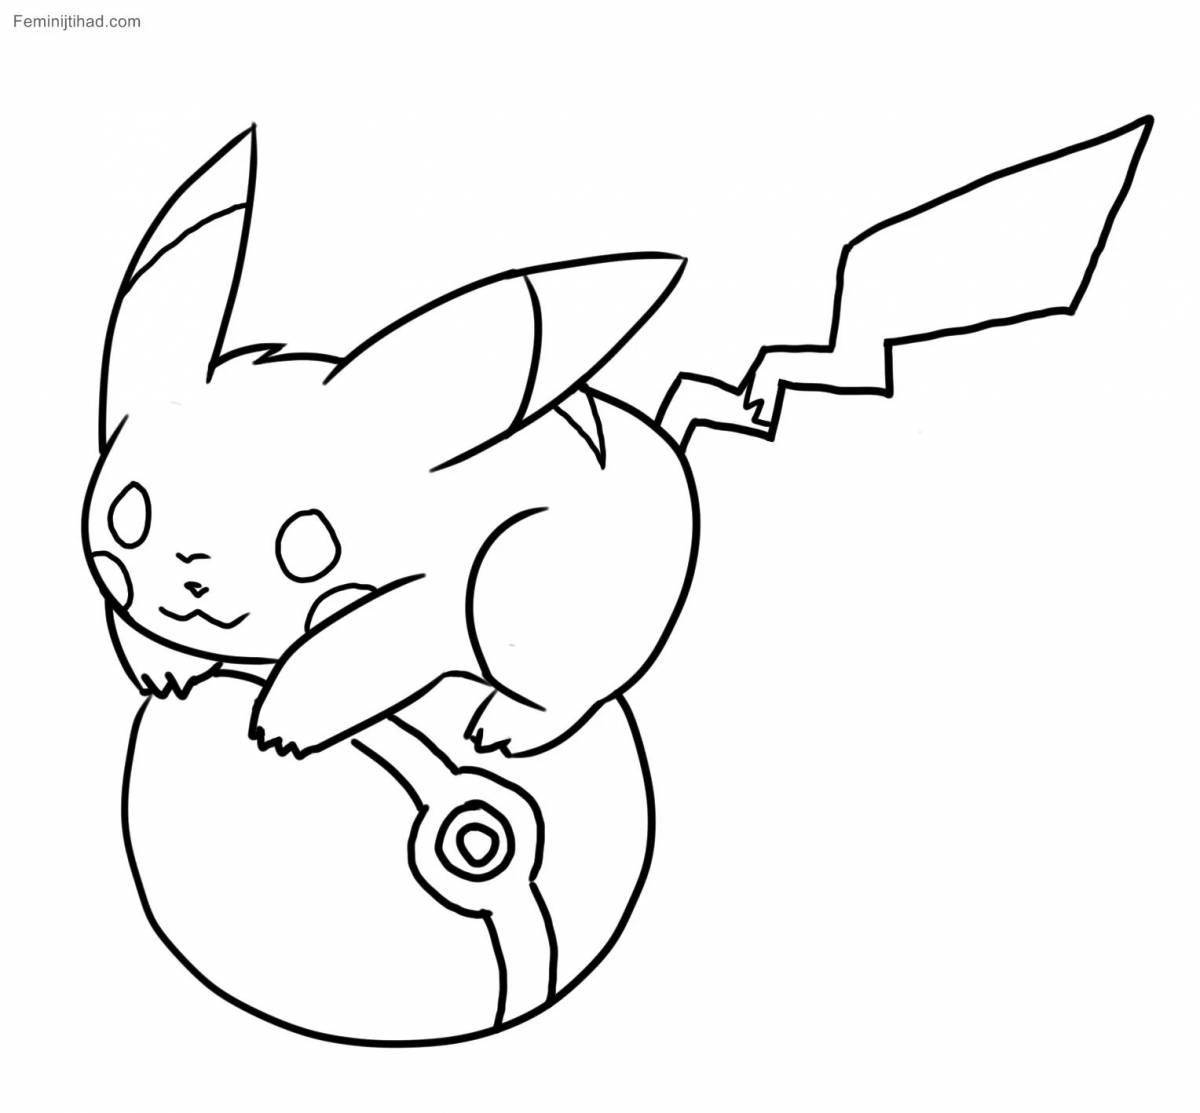 Evie and Pikachu Animated Coloring Page